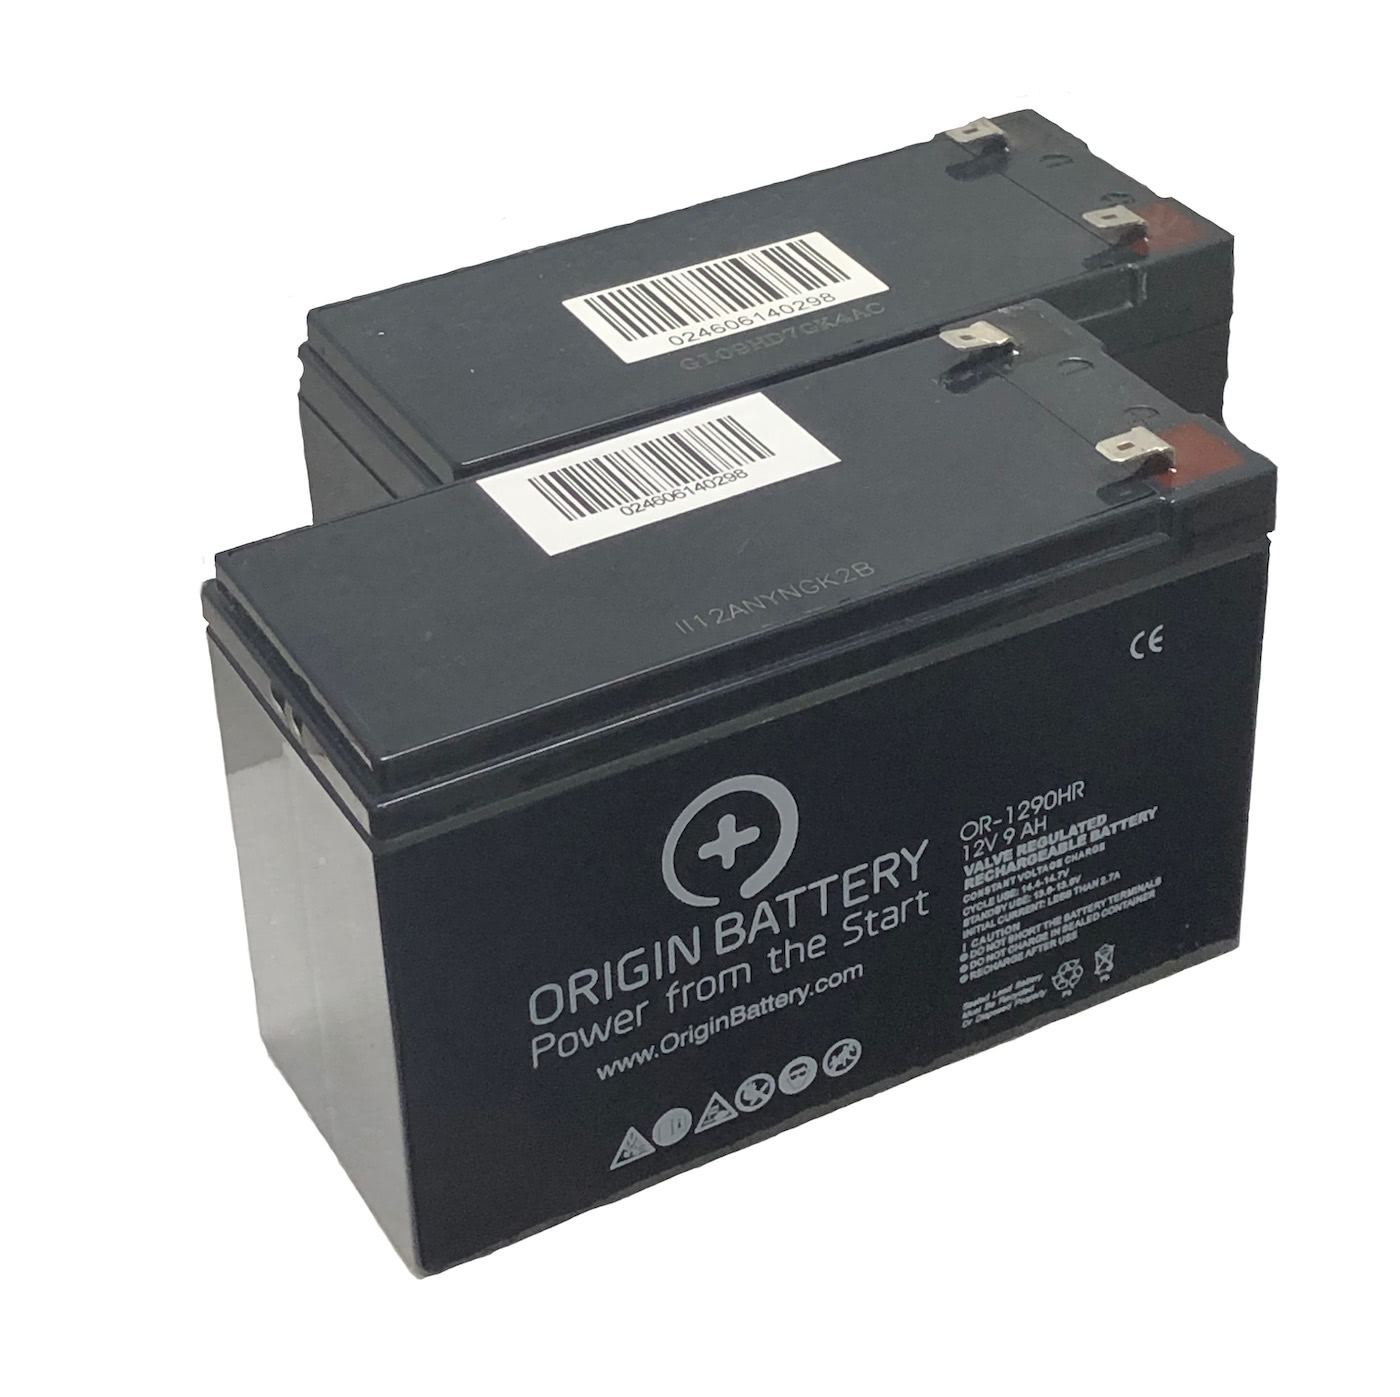 Will this battery replace the XT-9 12v9Ah battery for a ride on motorcycle